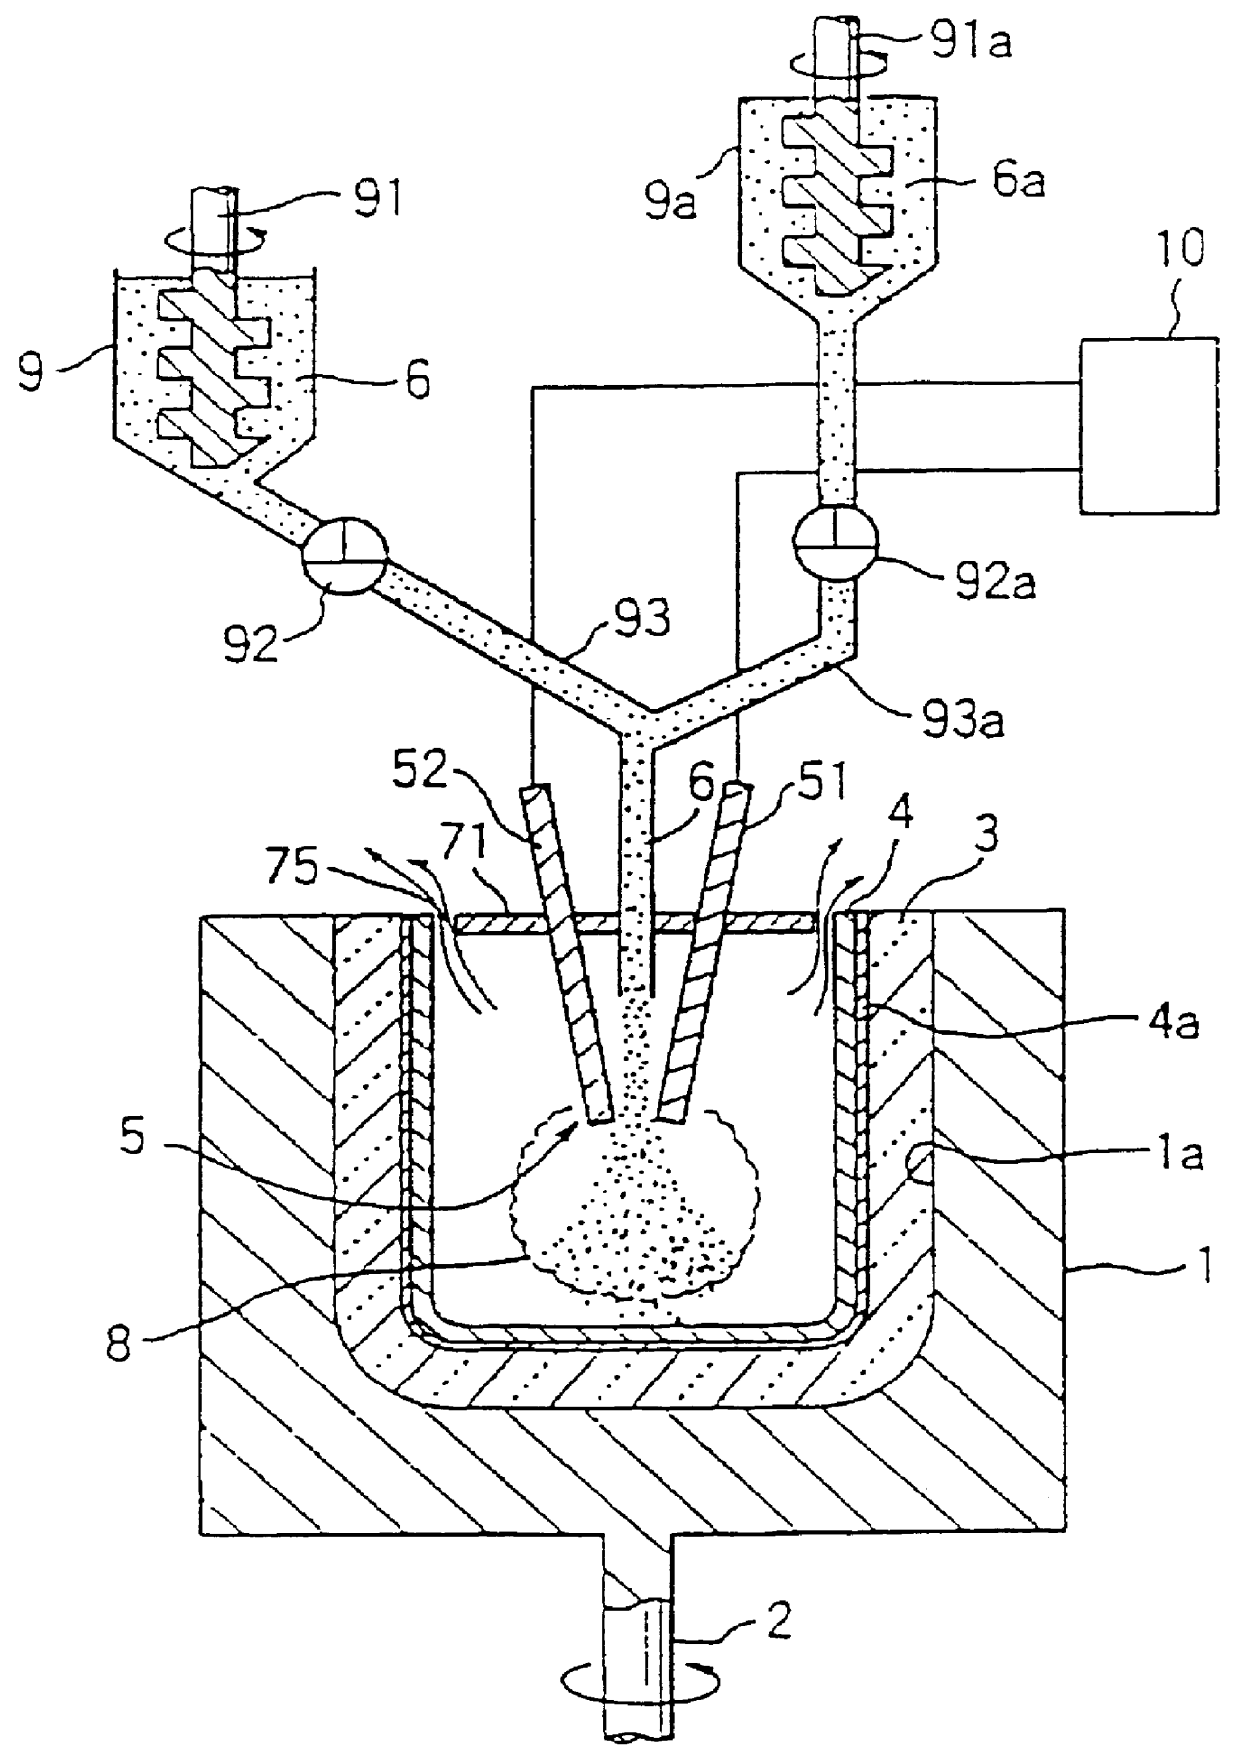 Quartz glass crucible for producing silicone single crystal and method for producing the crucible